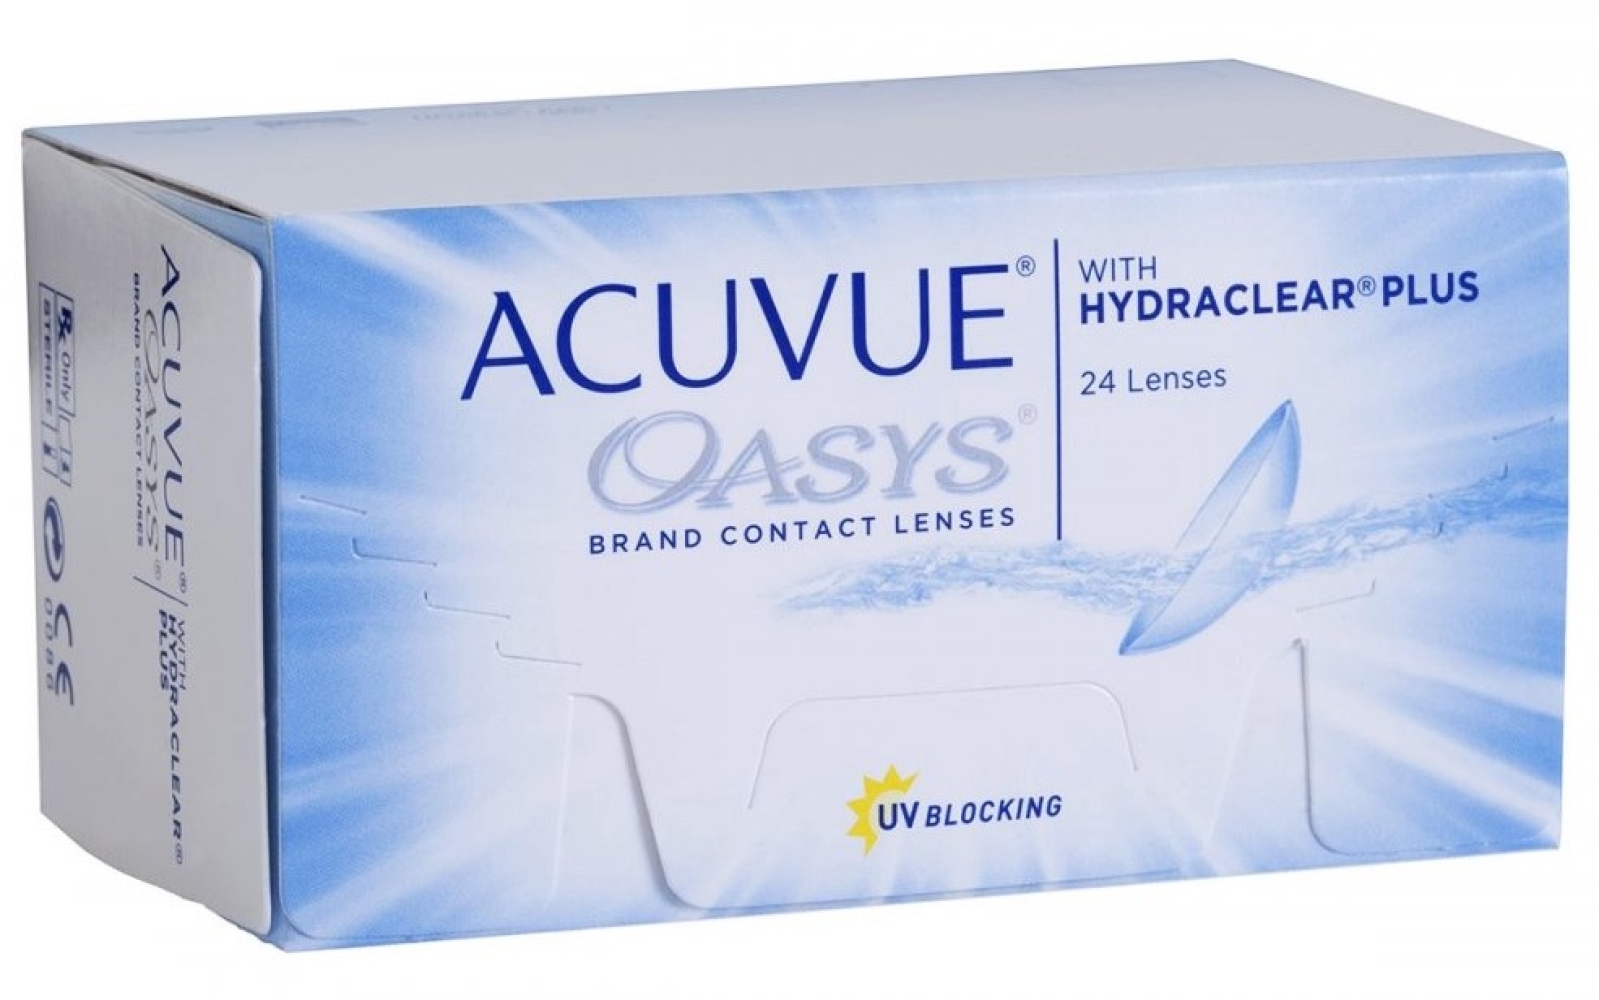 Acuvue oasys недельные. Acuvue Oasys with Hydraclear Plus (24 линзы). Acuvue Oasys with Hydraclear 24 шт. Линзы Acuvue Oasys двухнедельные -1.5 8.4. Линзы Acuvue Oasys with Hydraclear Plus.